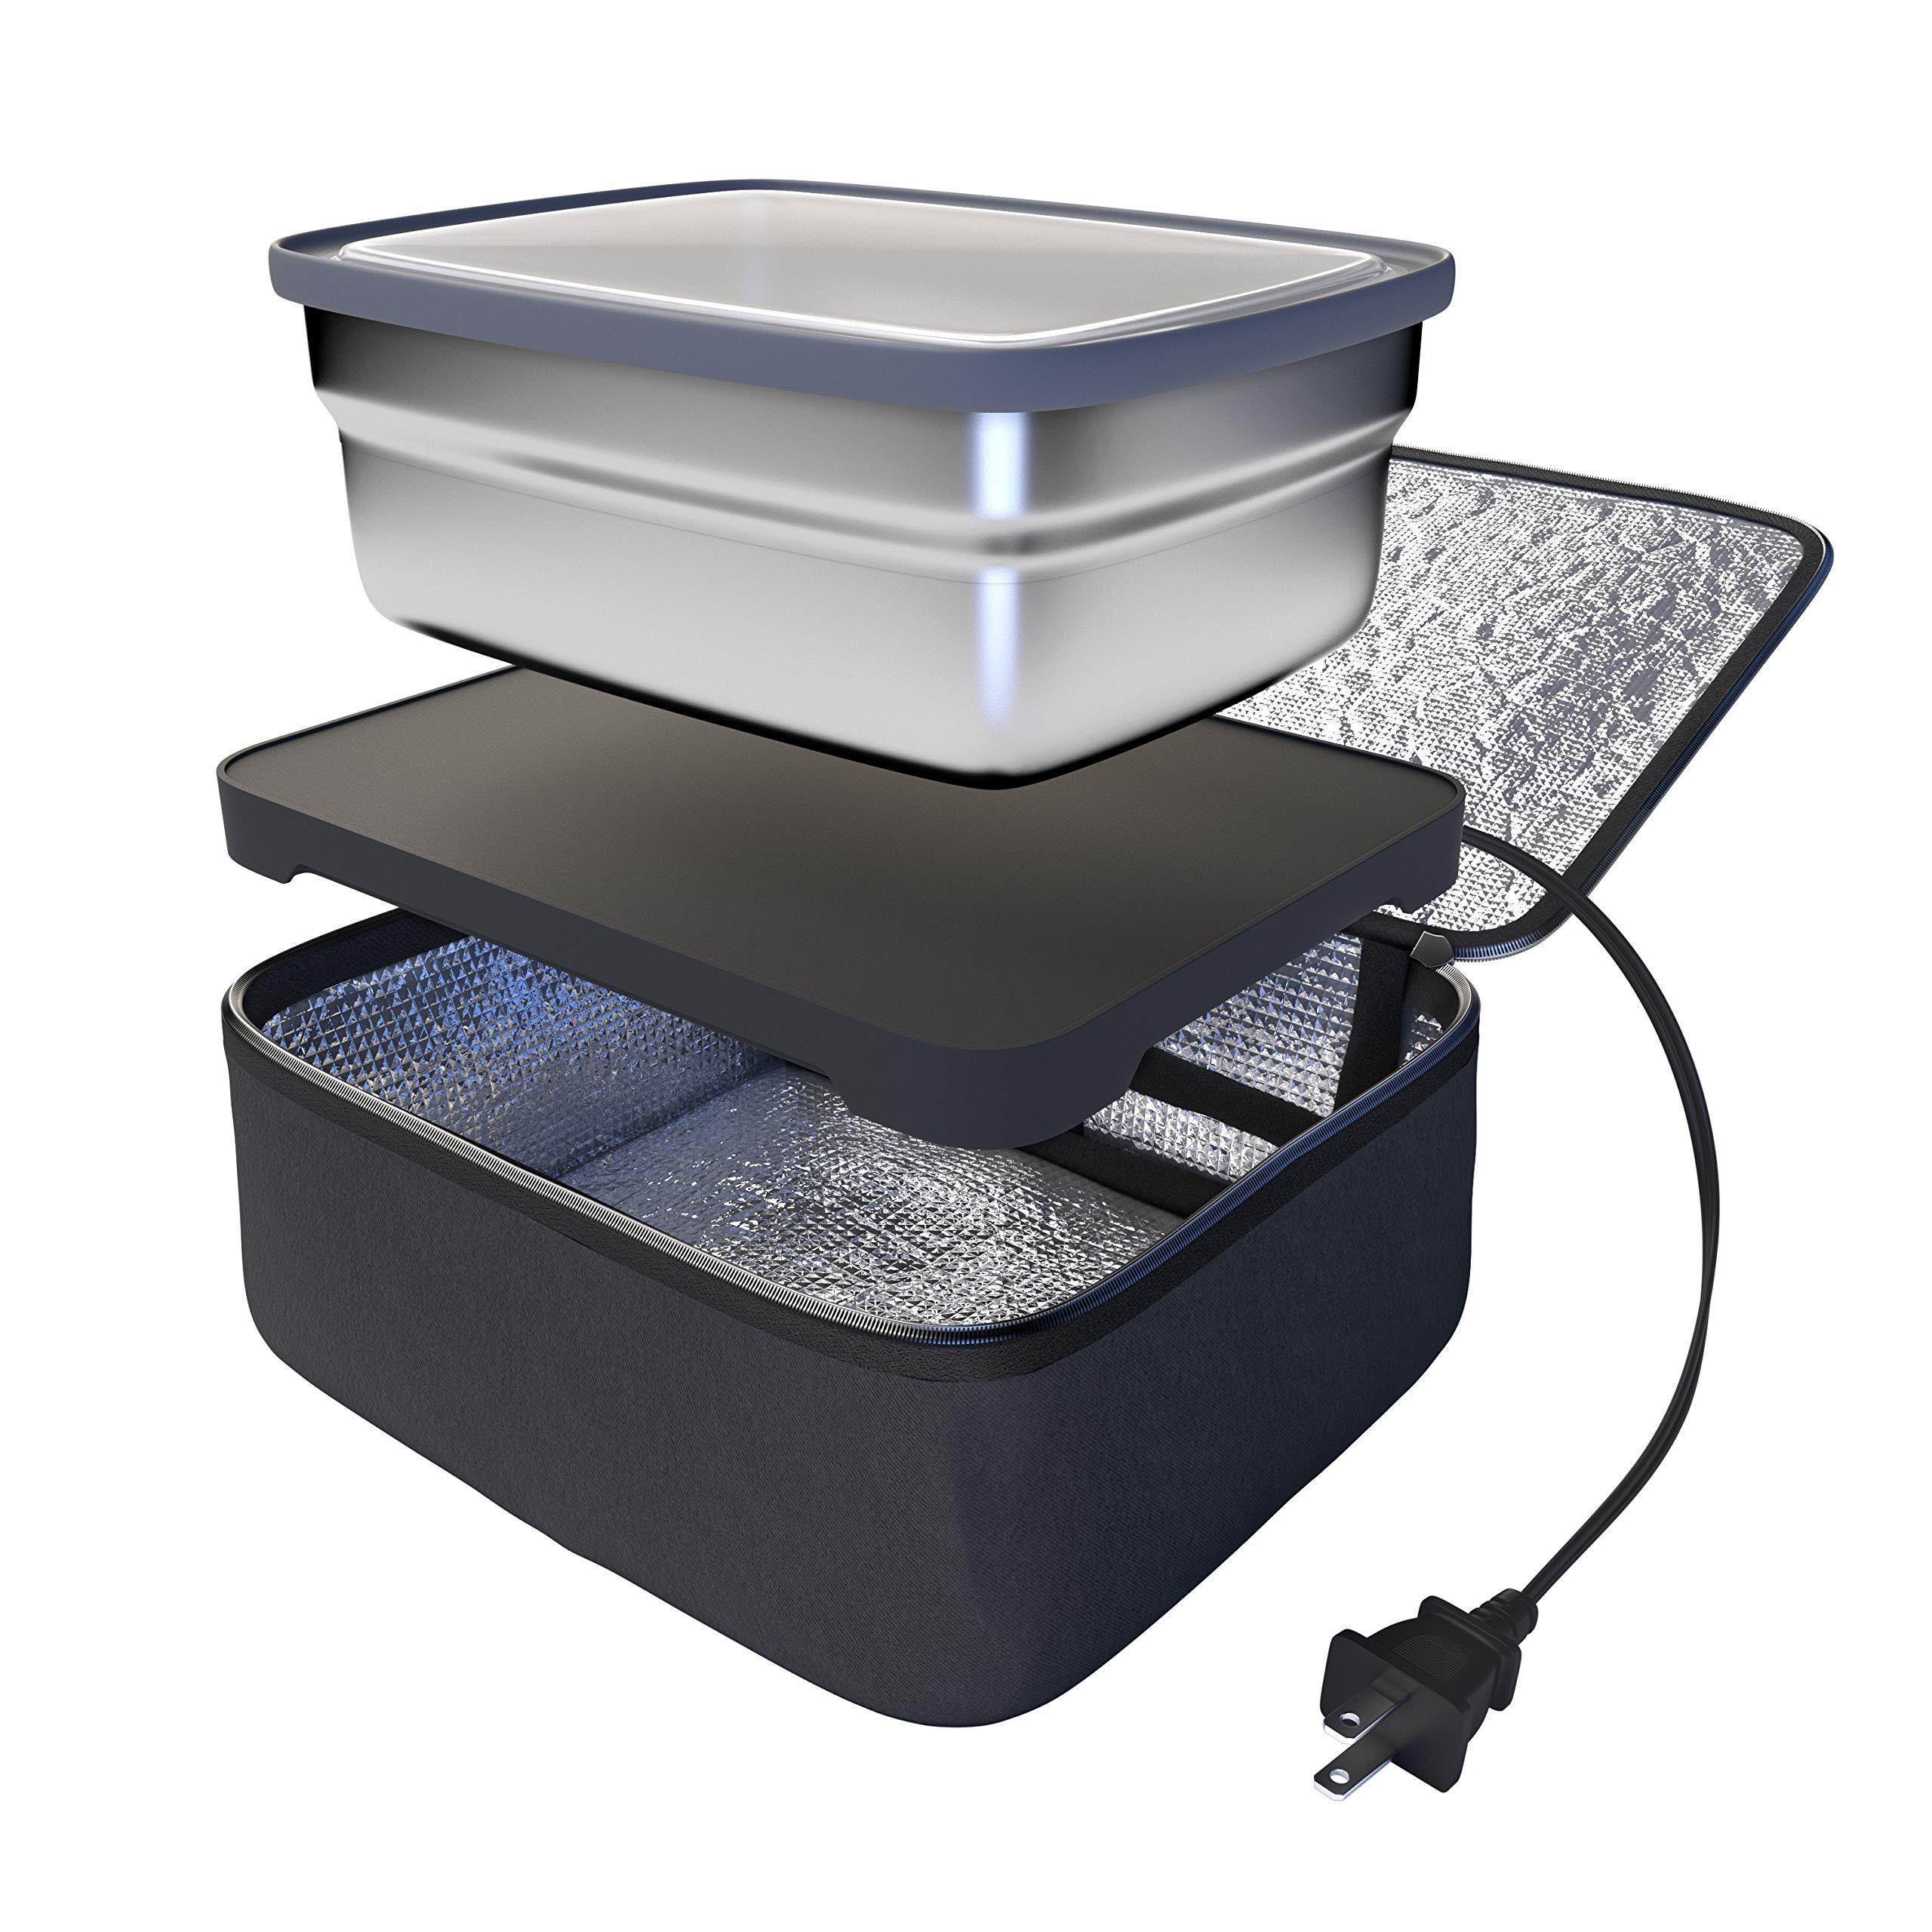 skywin portable oven and lunch warmer - personal food warmer for reheating meals at work without an office microwave